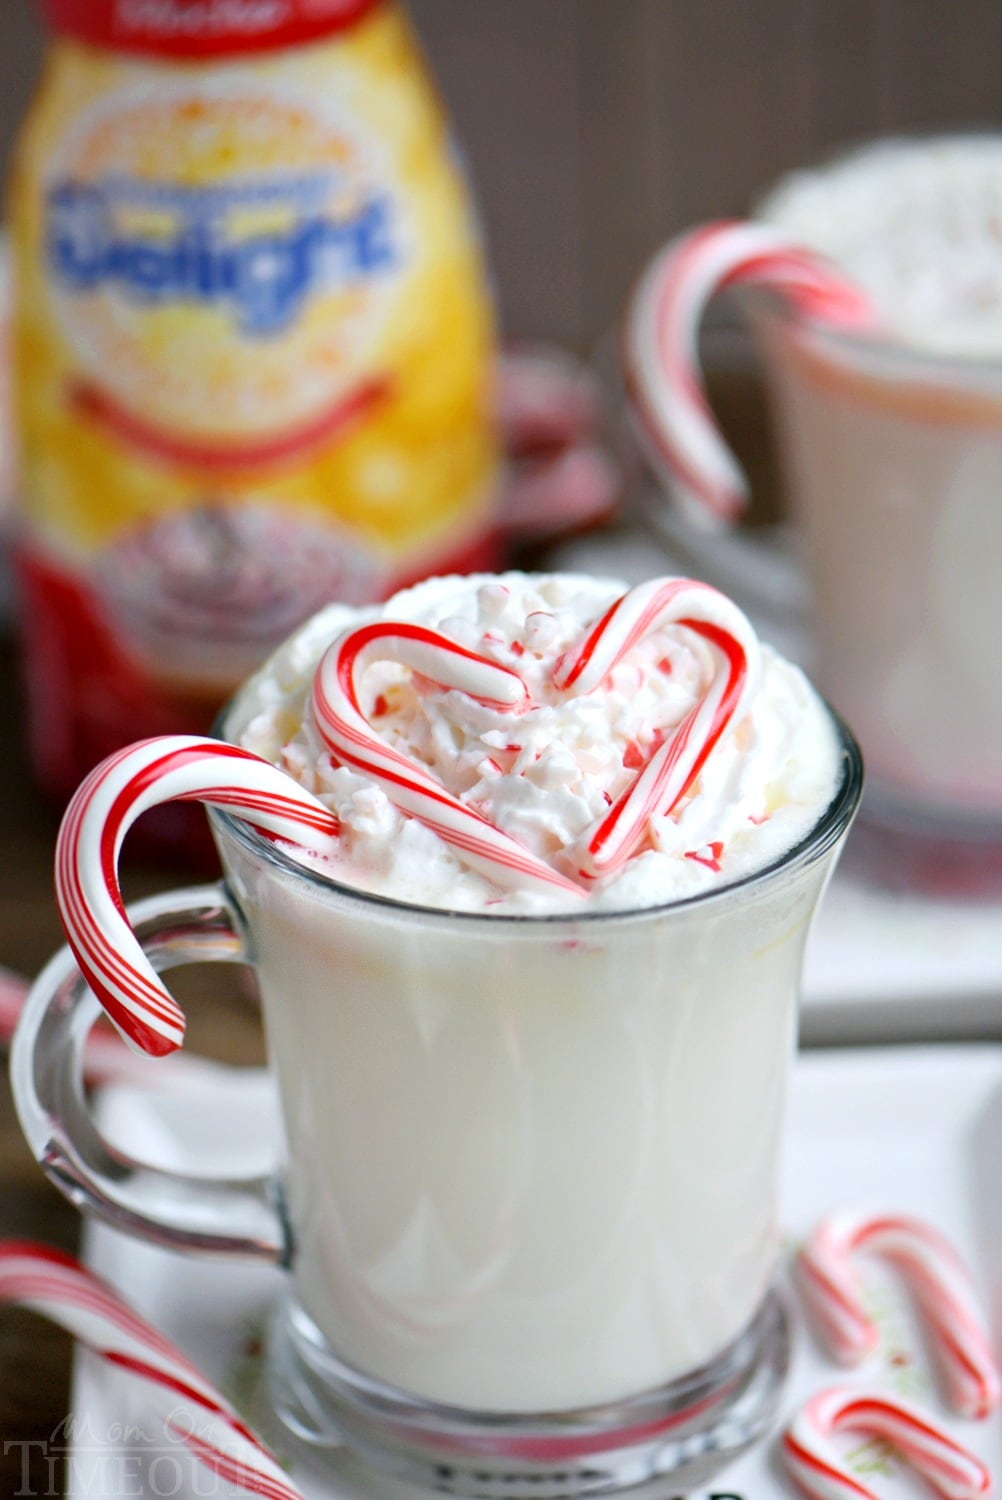 https://www.momontimeout.com/wp-content/uploads/2016/12/slow-cooker-peppermint-white-hot-chocolate-id.jpg